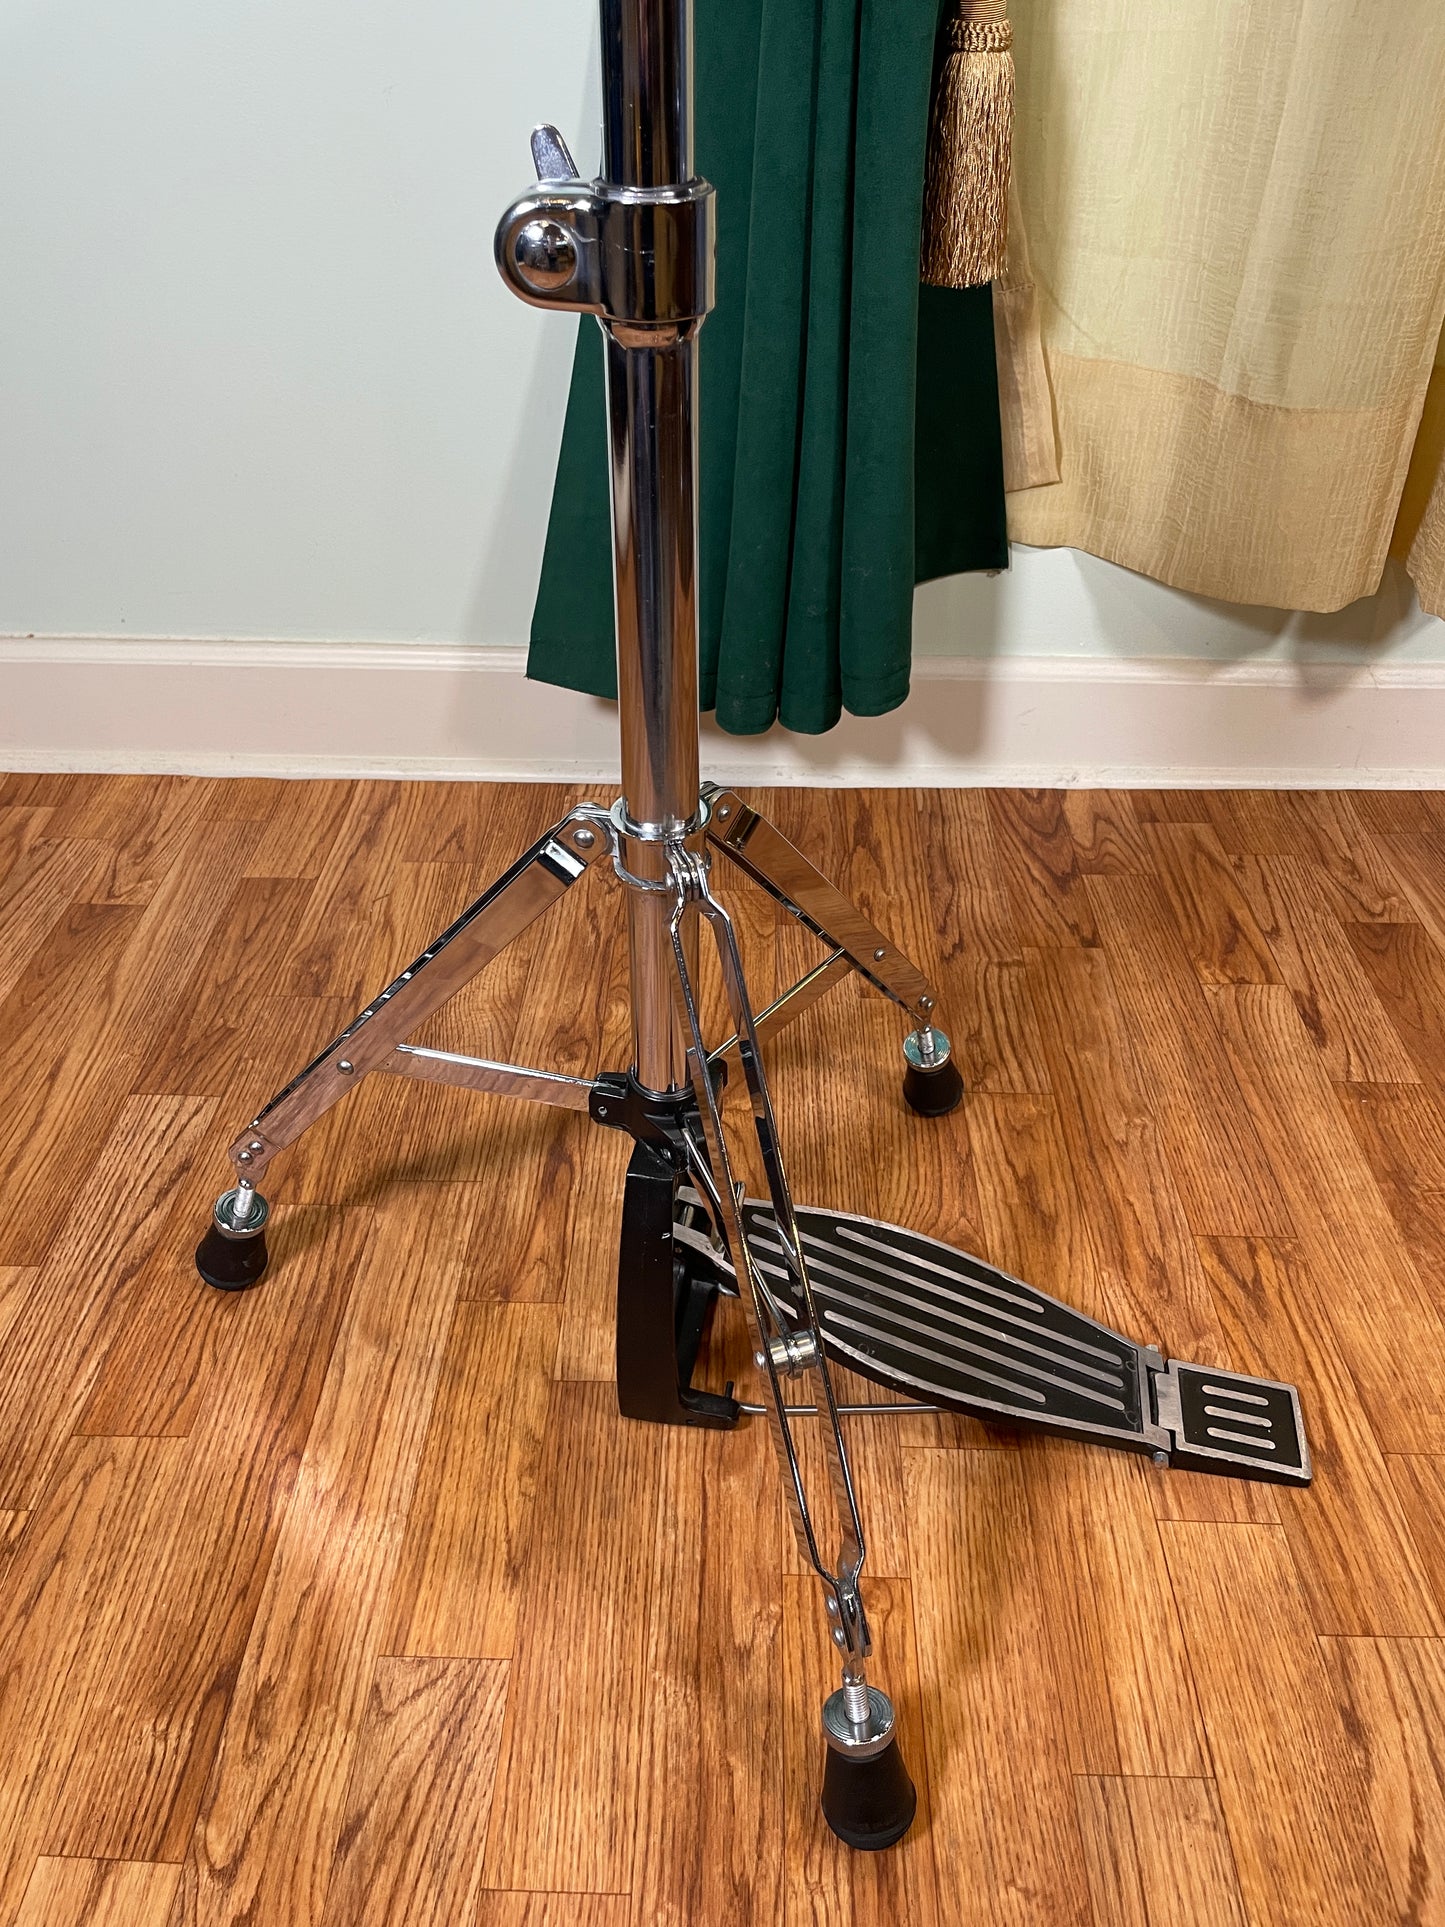 1980s Sonor Phonic Z5474 Hi-Hat Stand